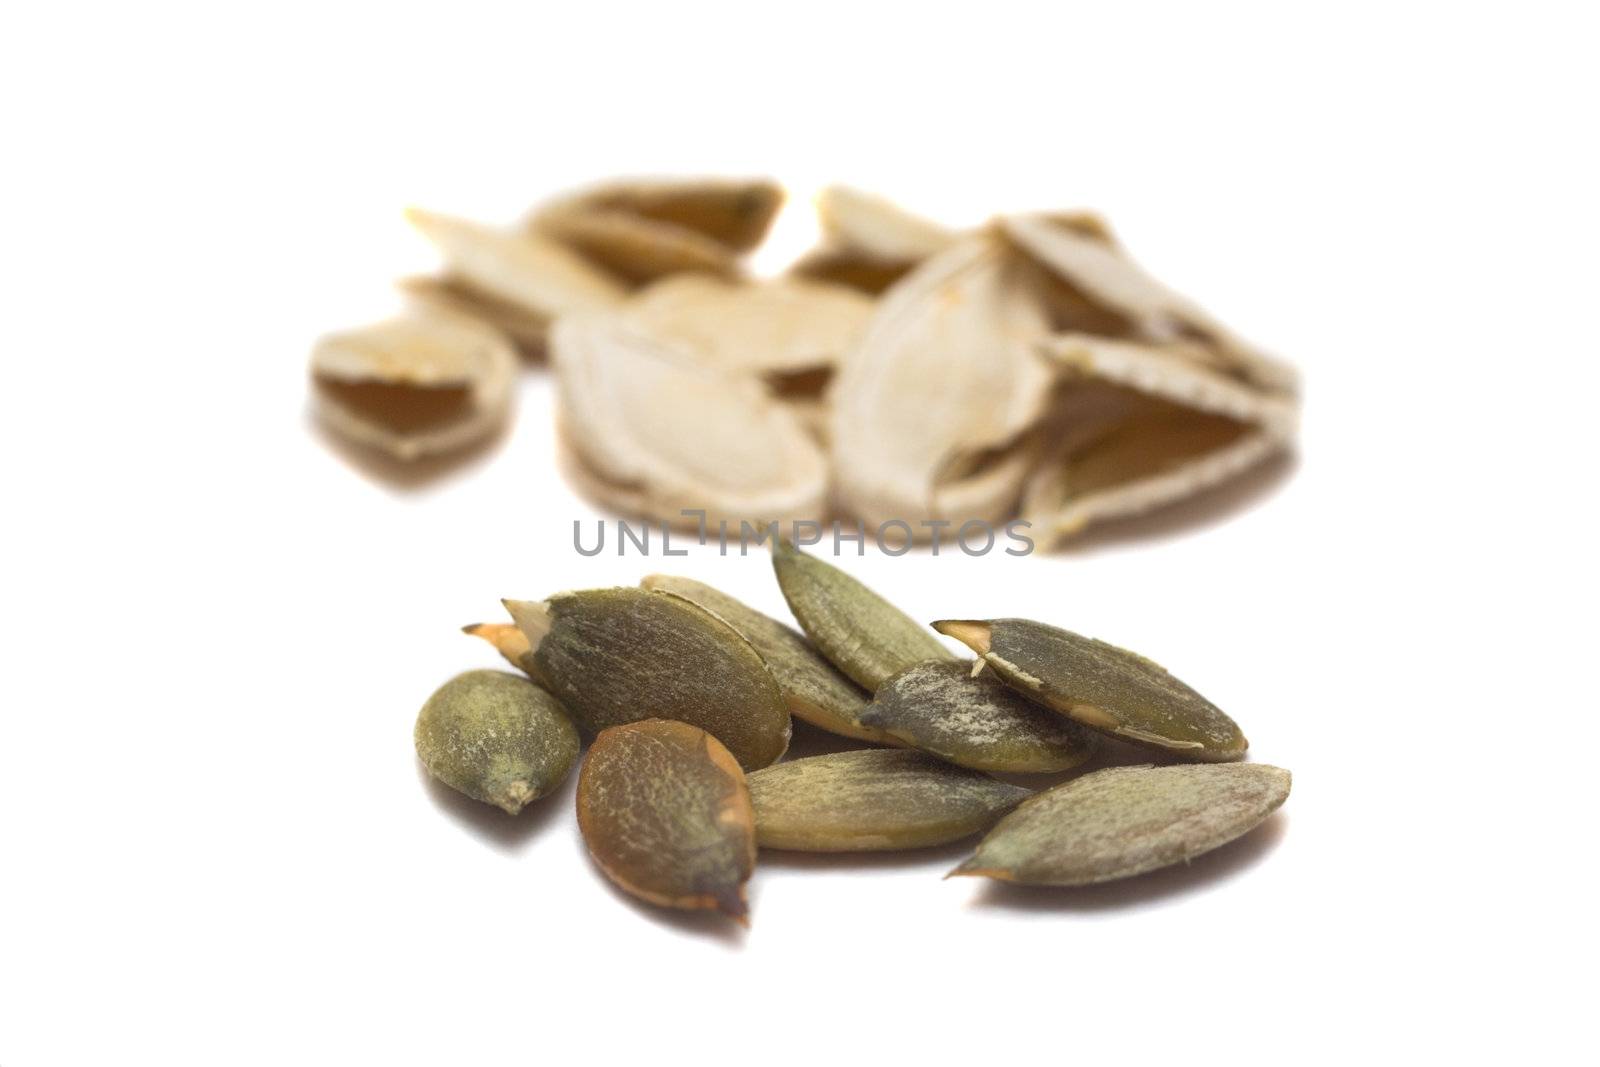 peel pumpkin seeds on focus and shells behind them, isolated on white